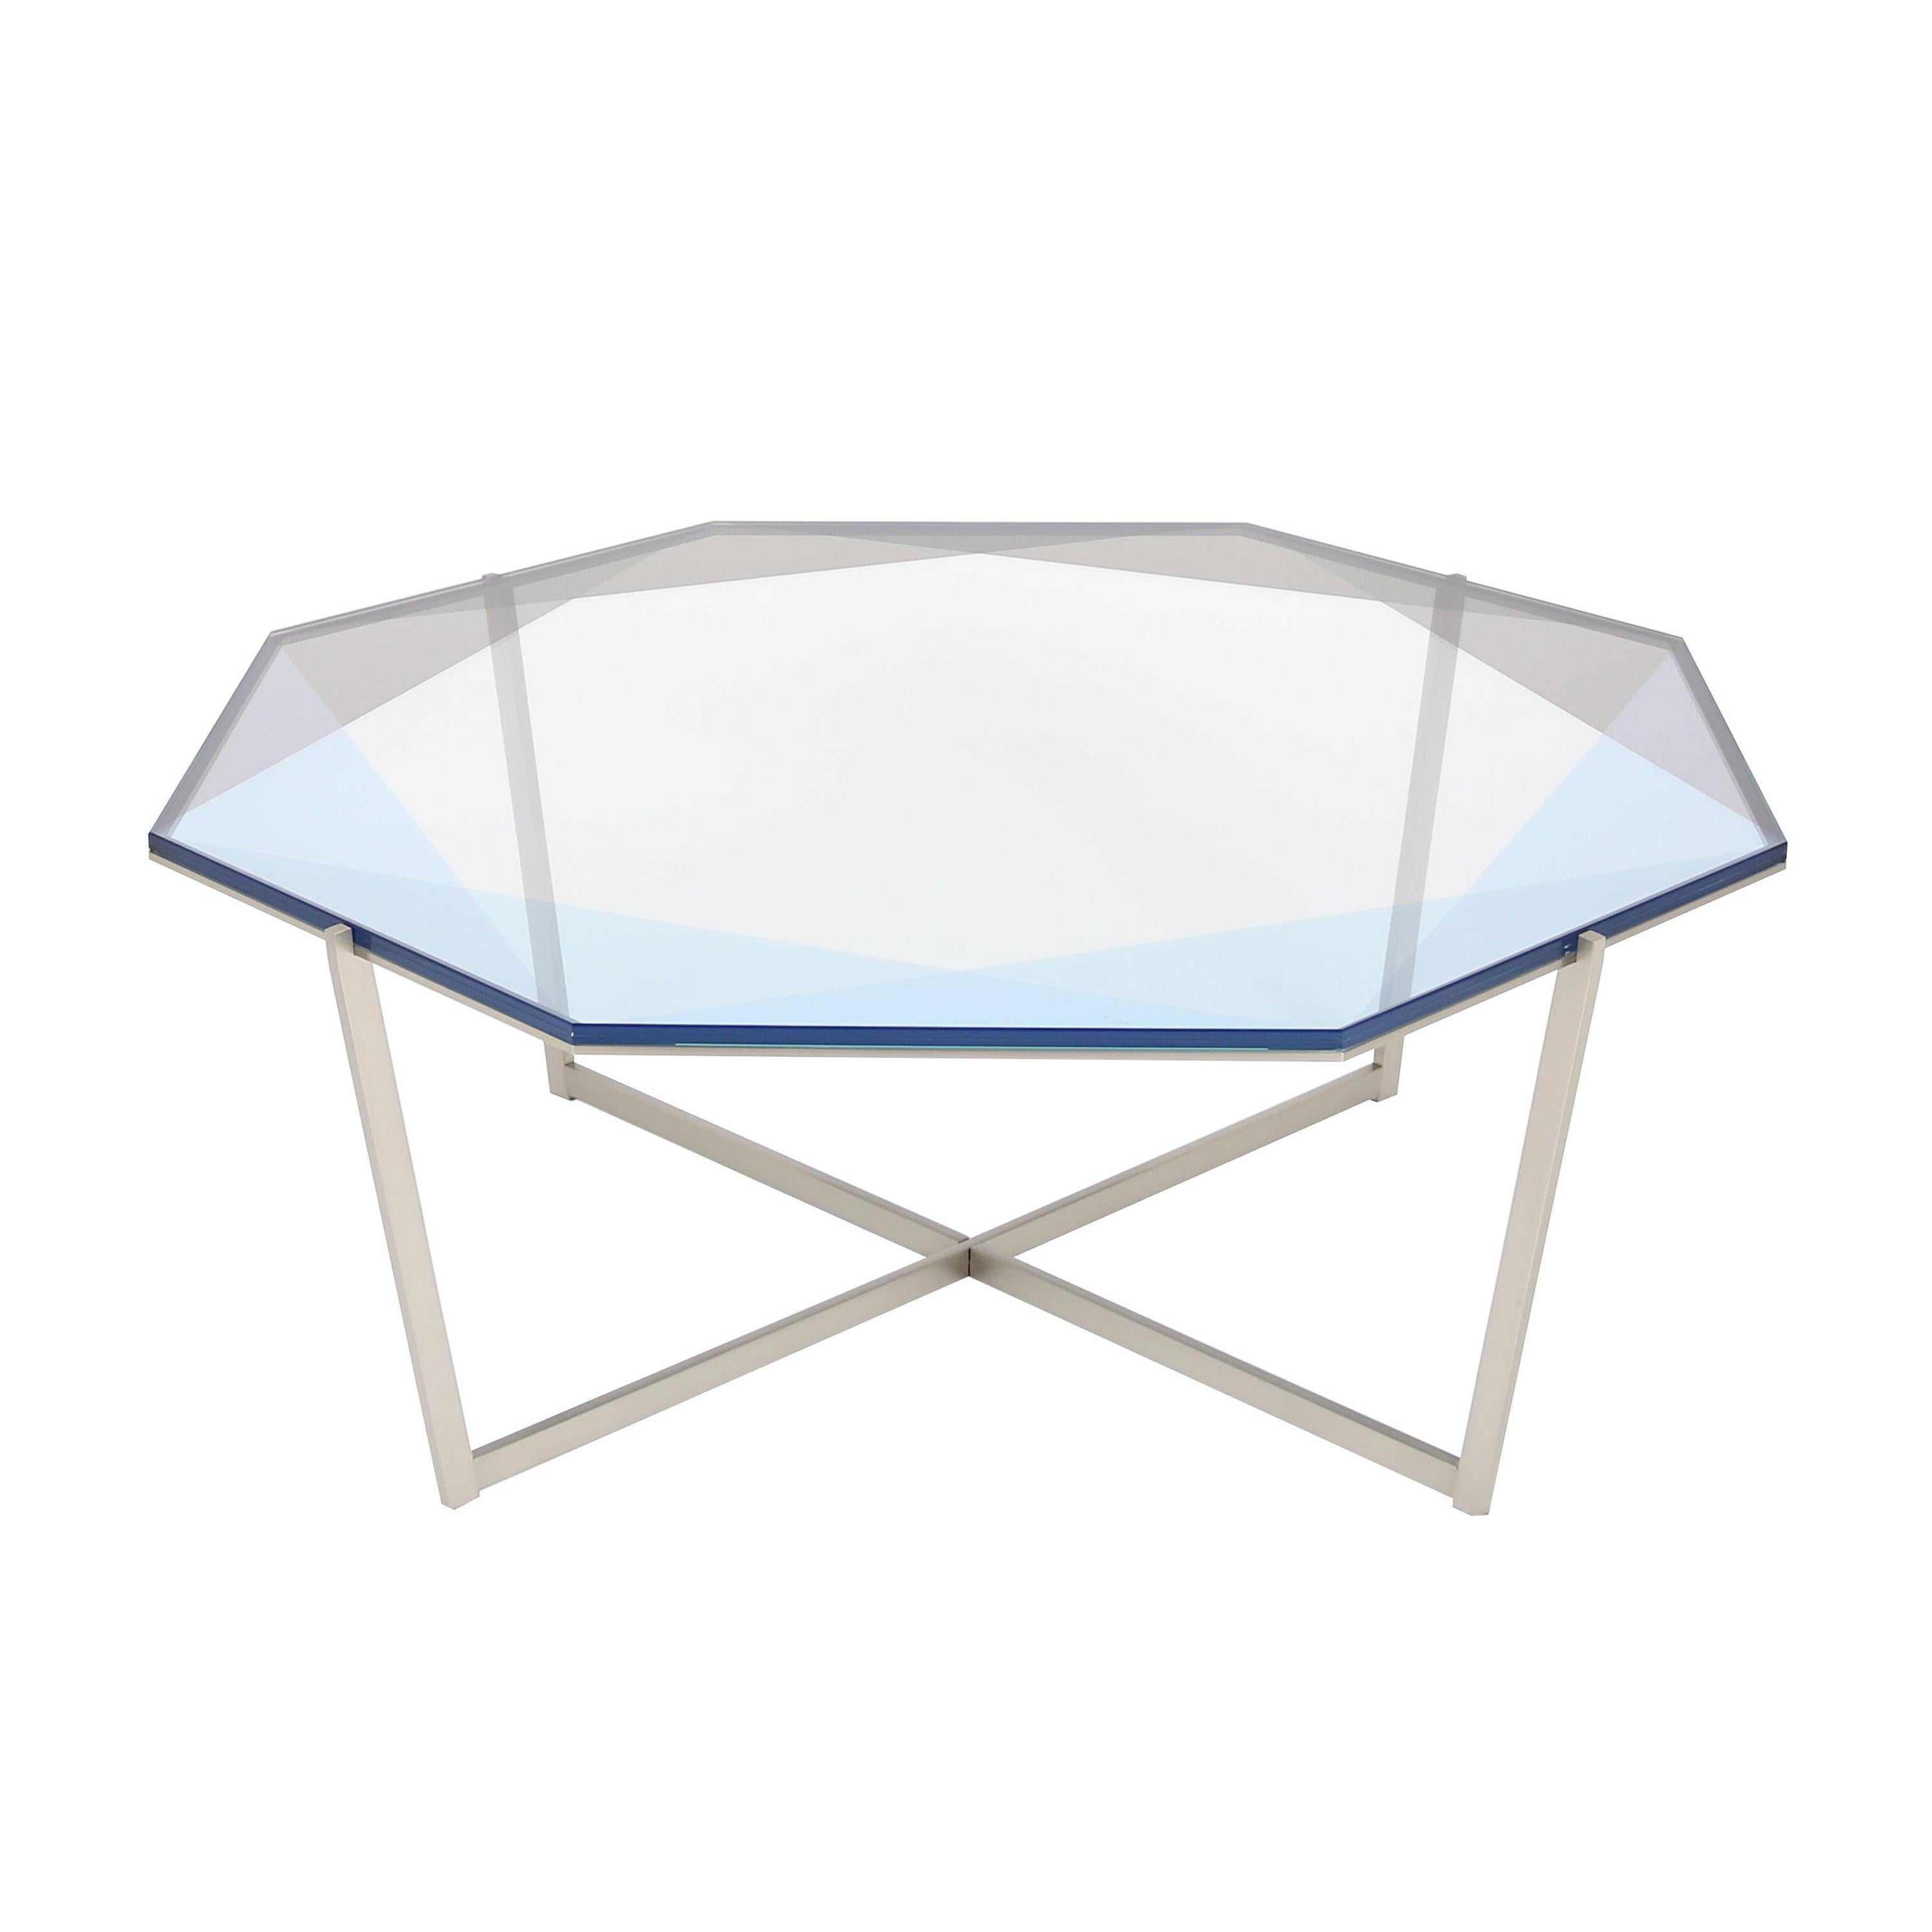 Gem Octagonal Coffee Table-Blue Glass with Stainless Steel Base by Debra Folz For Sale